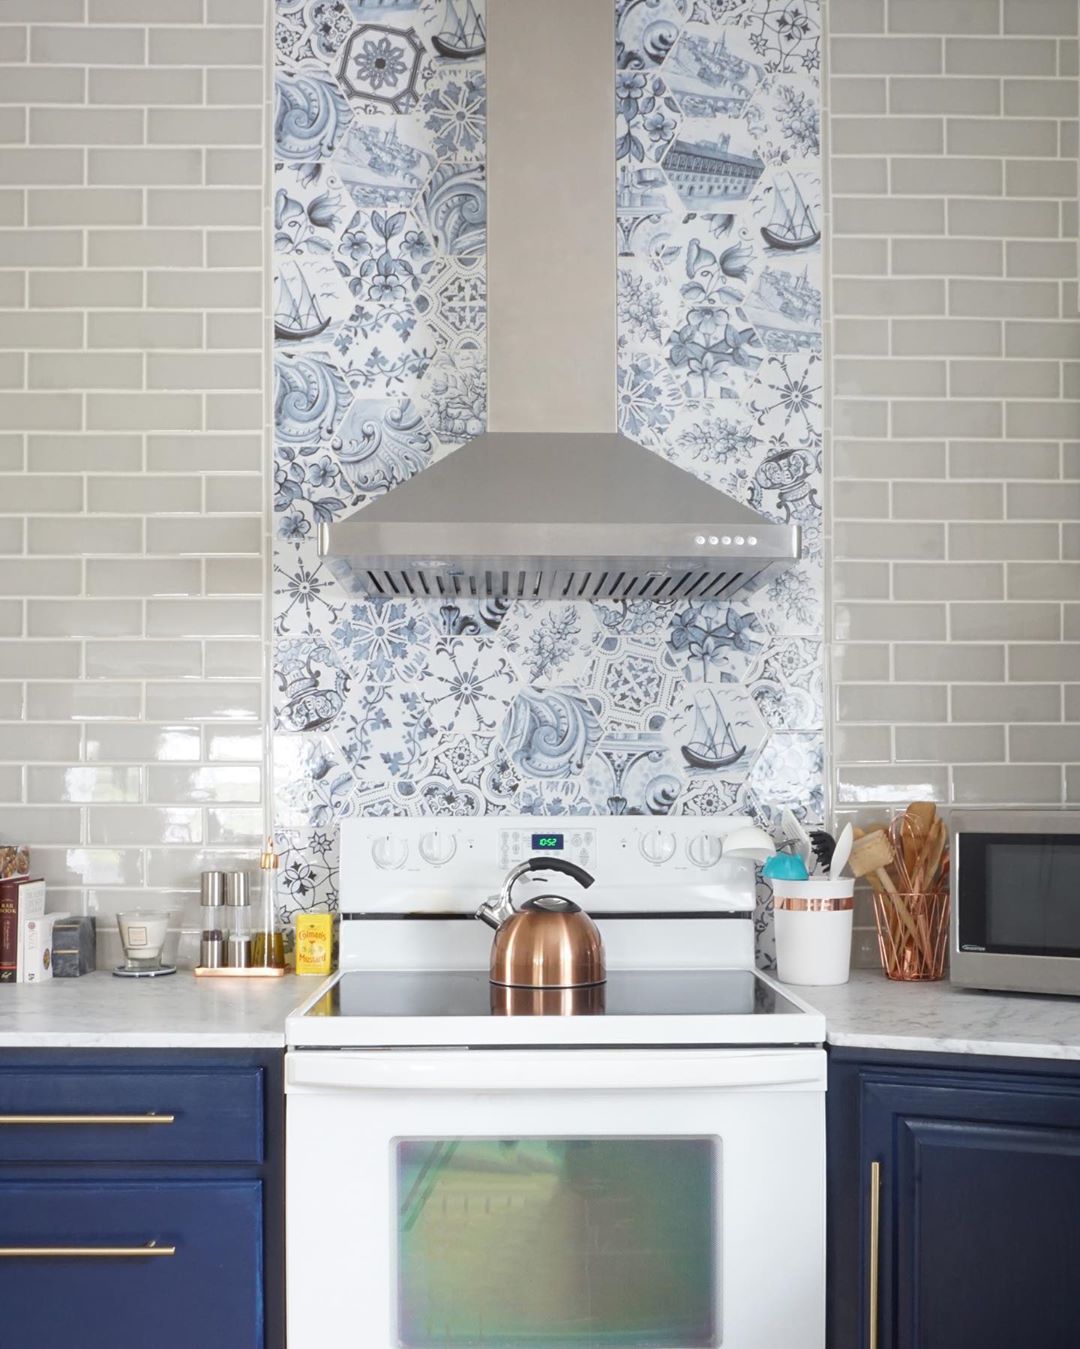 Hamilton Parker On Twitter Interiors By Anastasia Has Turned This Kitchen Into A Total Dream Blues